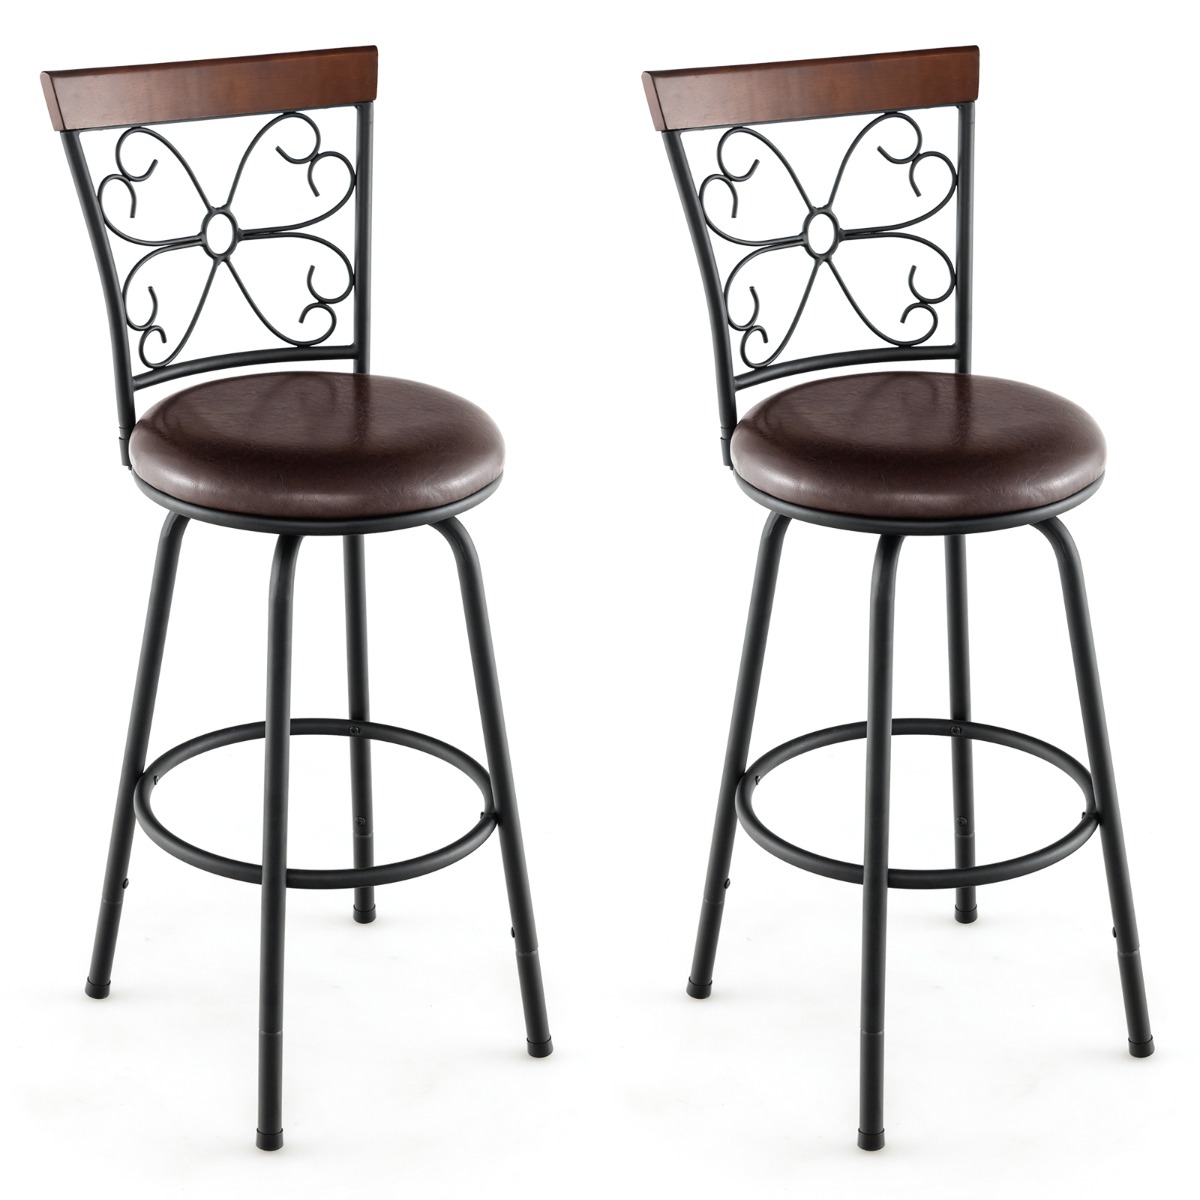 Swivel Bar Stool Set of 2 with Adjustable Height